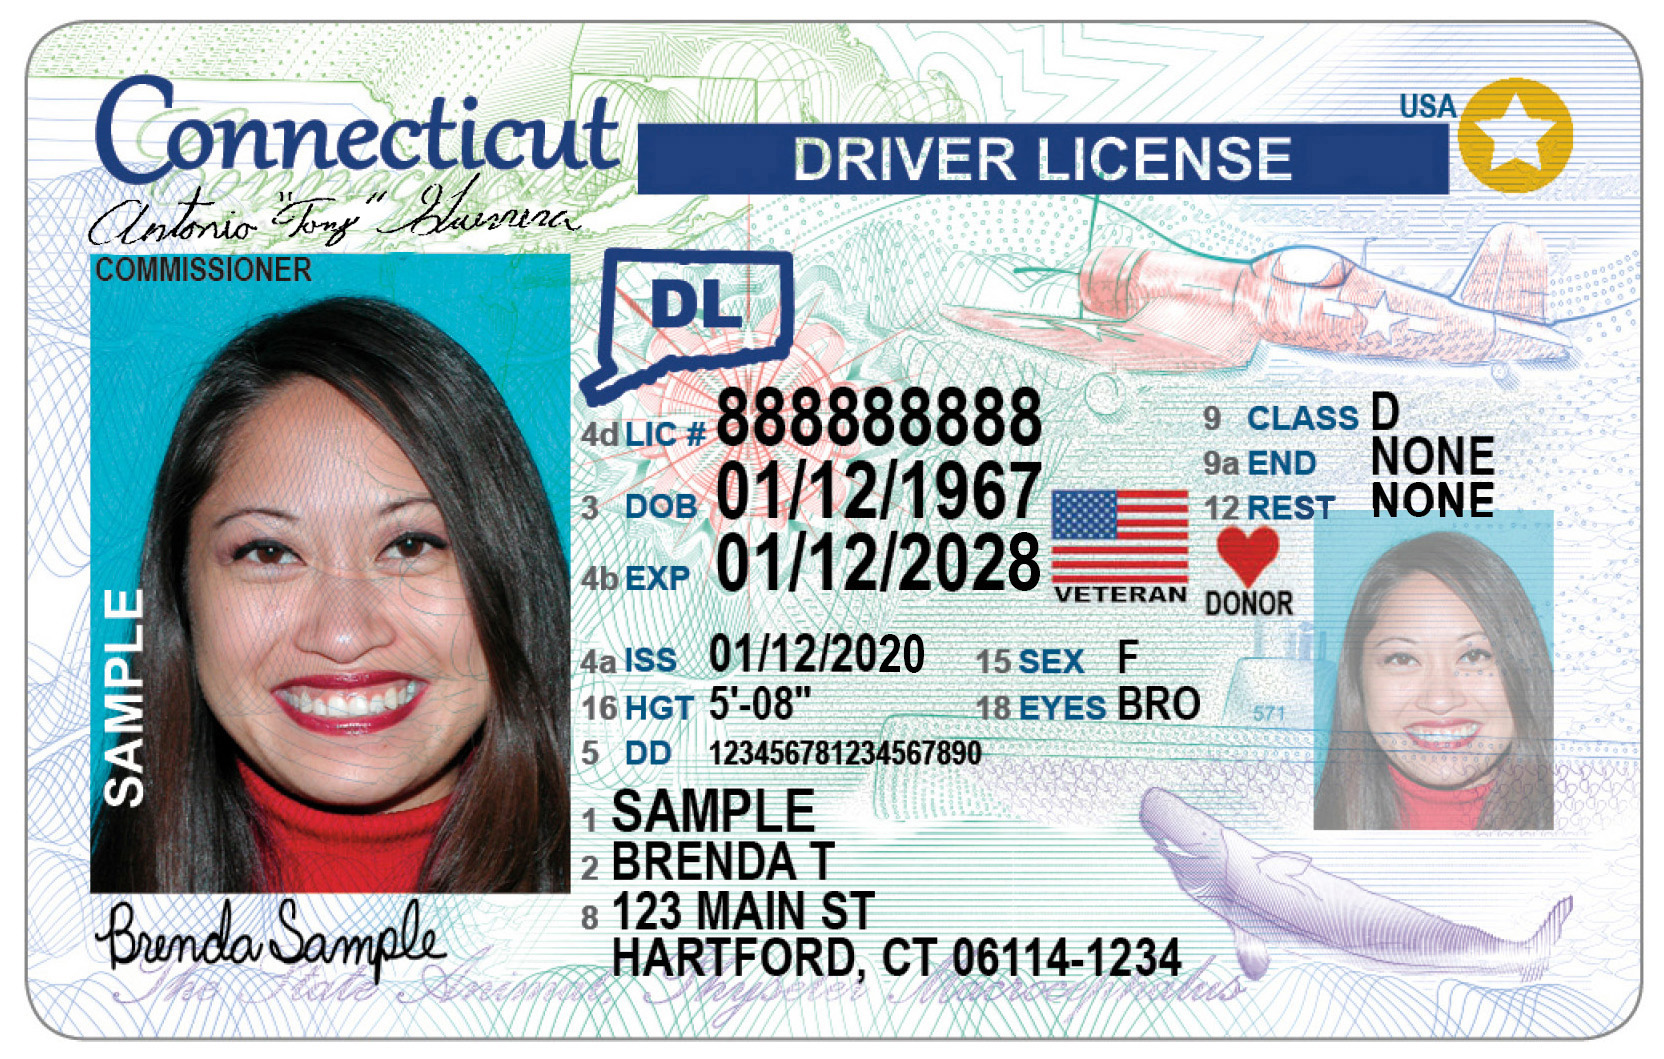 can you lookup your driver's license number